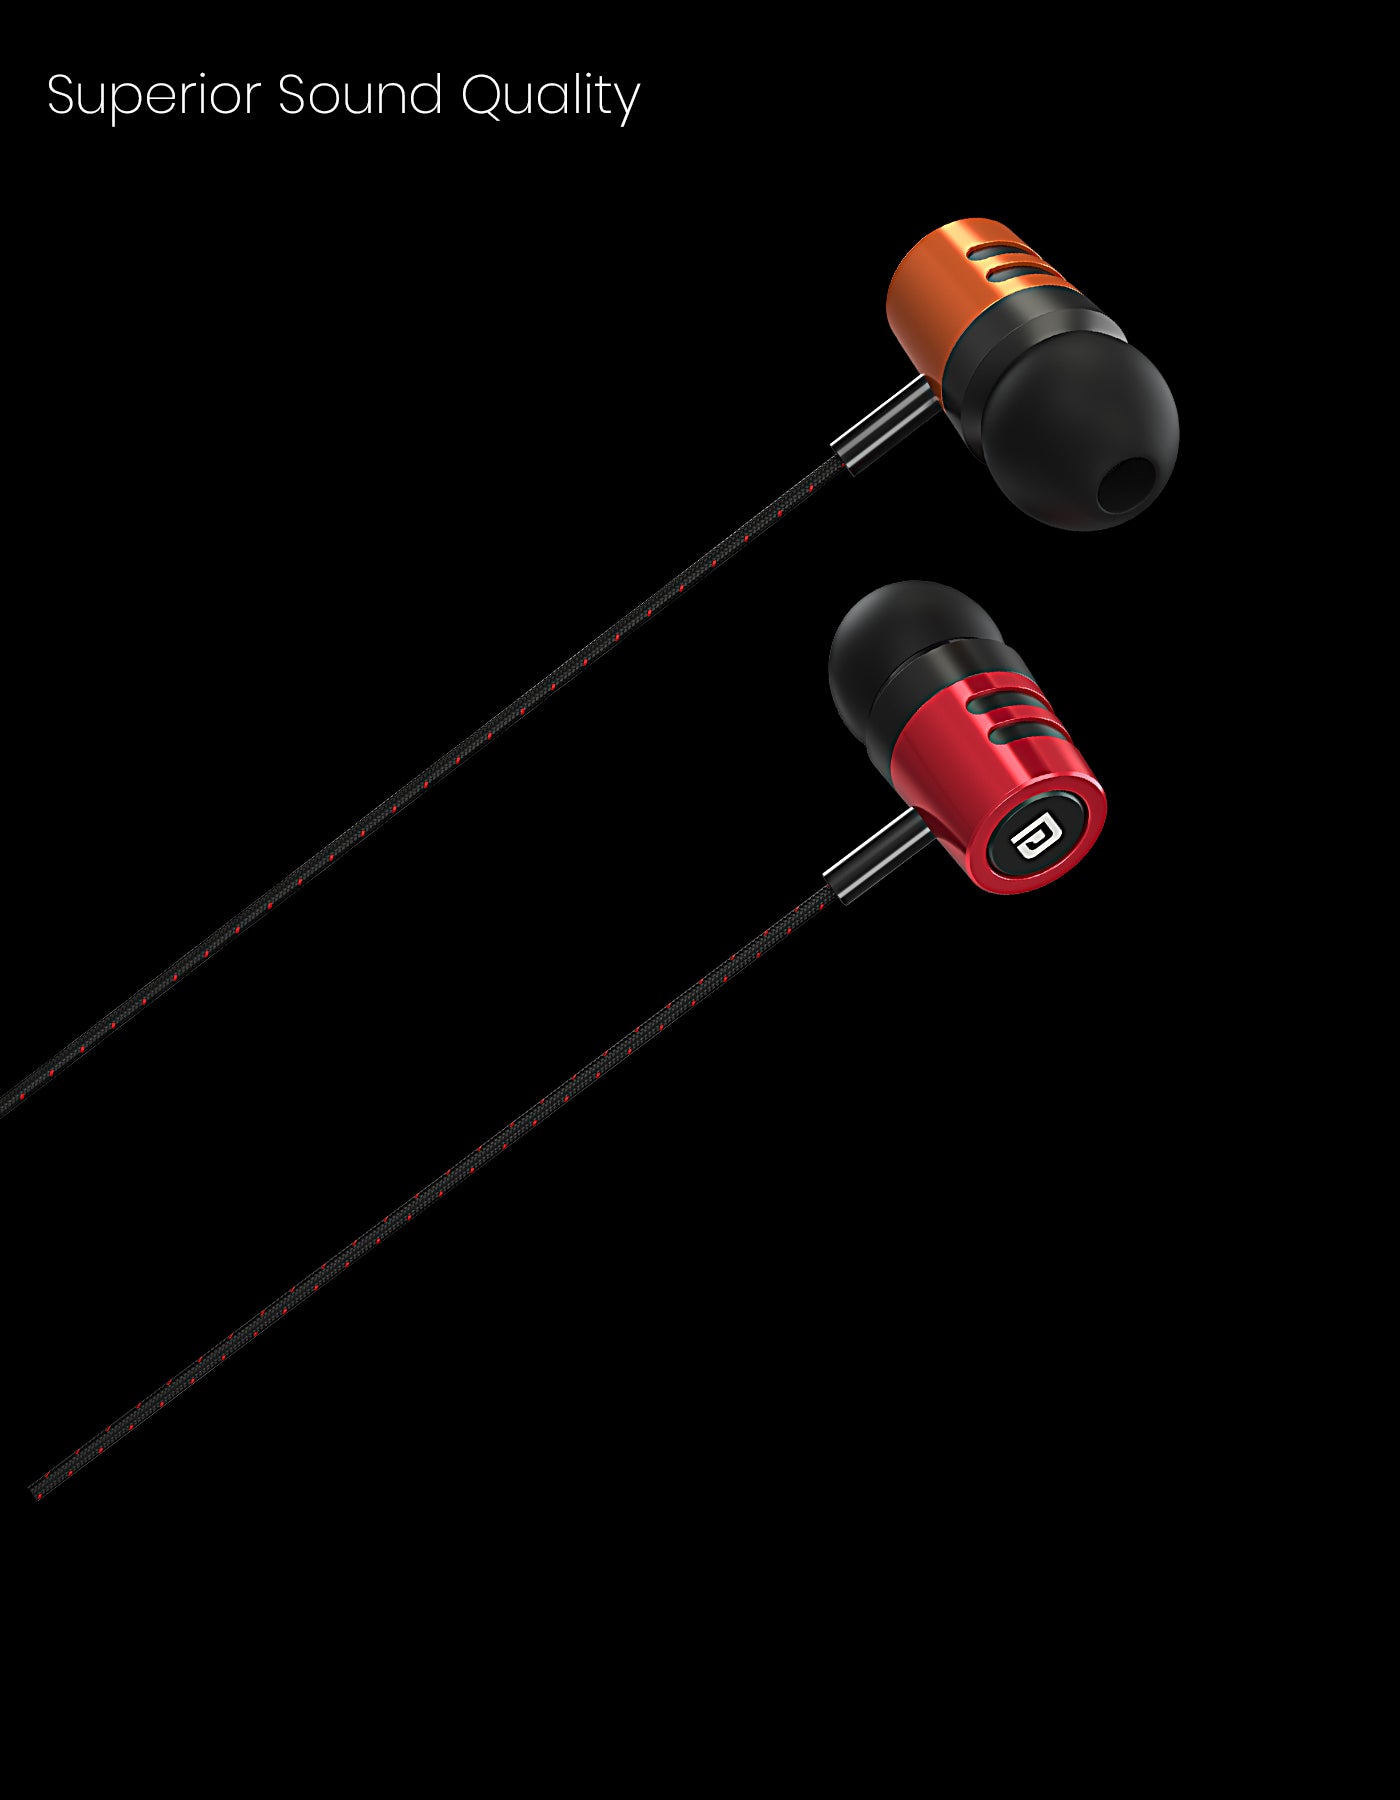 Portronics Ear 2: In-Ear Stylish Wired Earphone with good sound quality